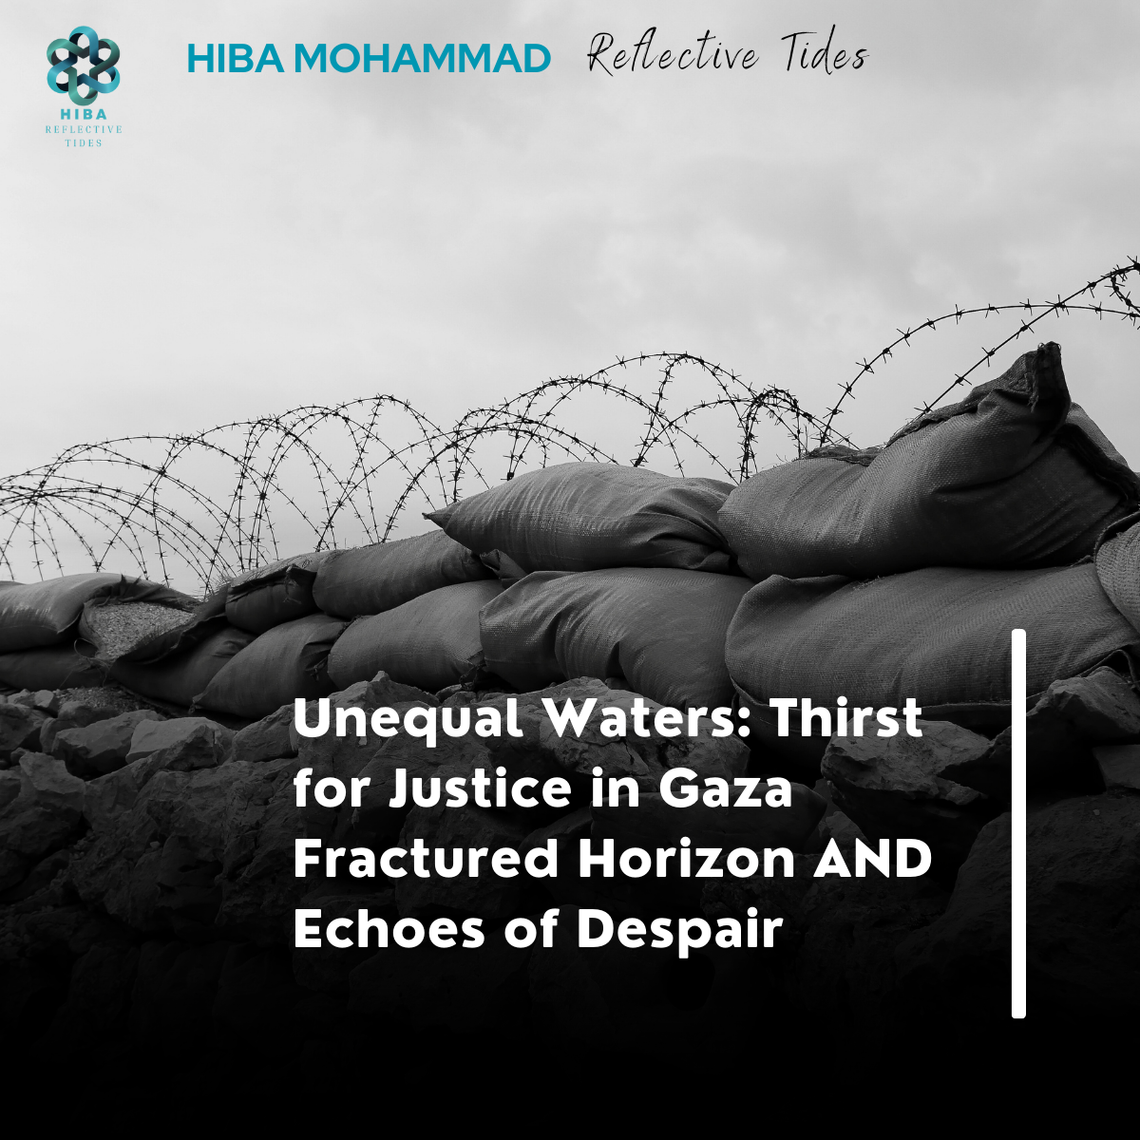 Unequal Waters: Thirst for Justice in Gaza